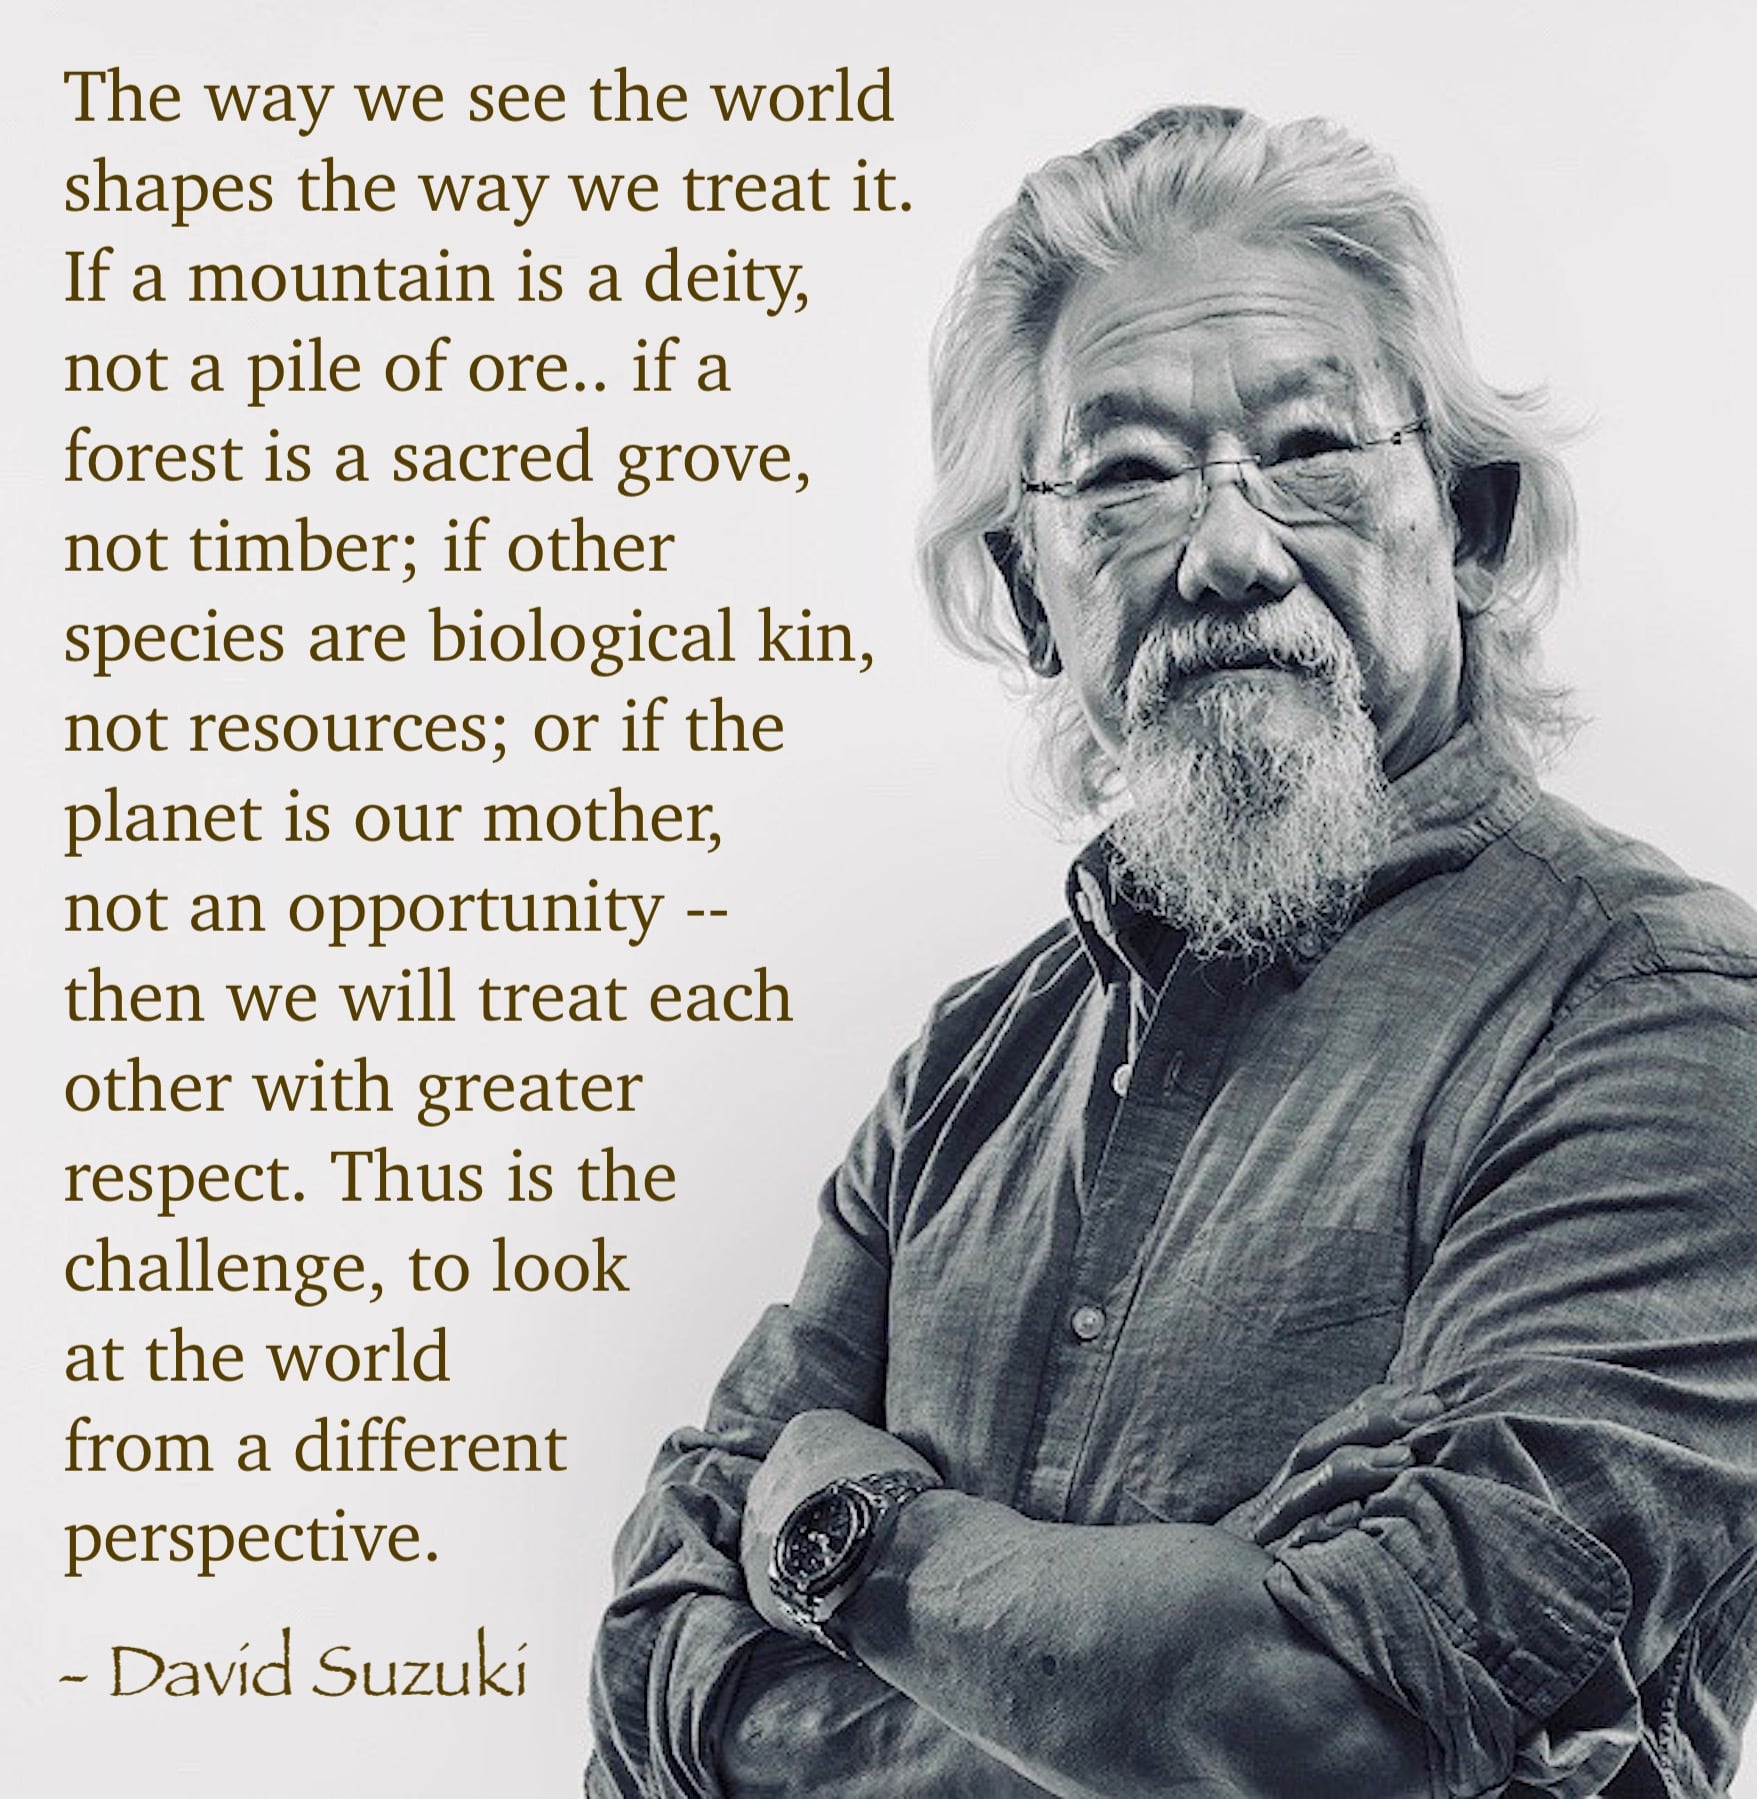 the way we see the world shapes the way we treat it, if a mountain is a deity, not a pile of ore, if a forest is a sacred grove, not timber, then we will treat each other with greater respect, thus is the challenge, david suzuki